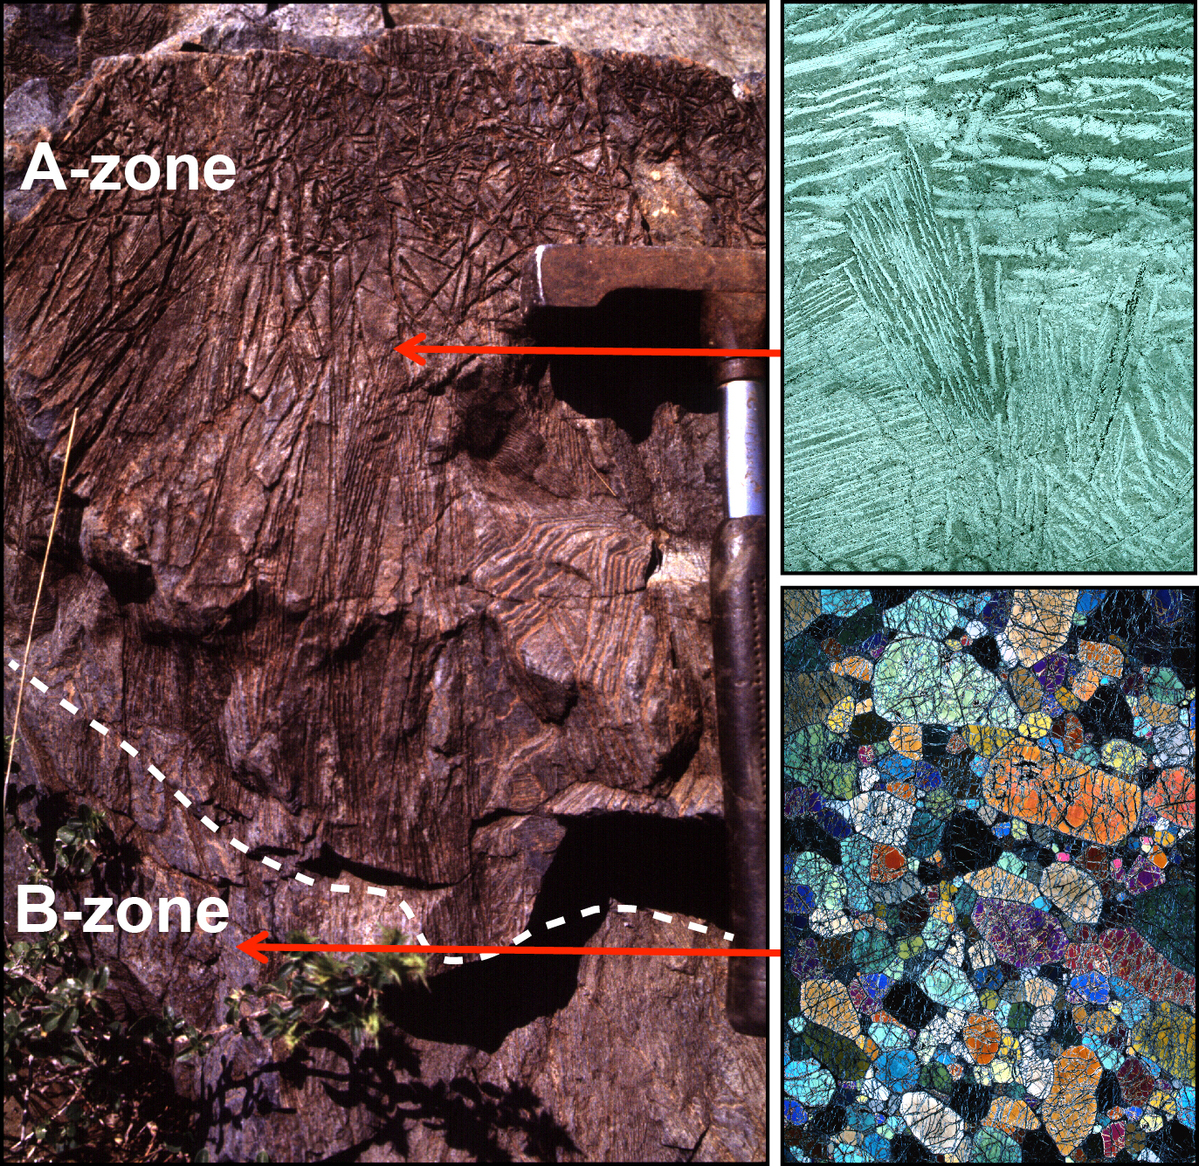 A 3.4-billion-year-old komatiite flow from the Barberton greenstone belt in South Africa, where these ultra-high temperature lavas were first recognised. The A-zone (upper) is dominated by fine crystals of olivine called ‘spinifex texture’, while the B-zone (lower) consists of a solid matrix of olivine crystals, which mark the base of the komatiite lava river. Image: David Mole